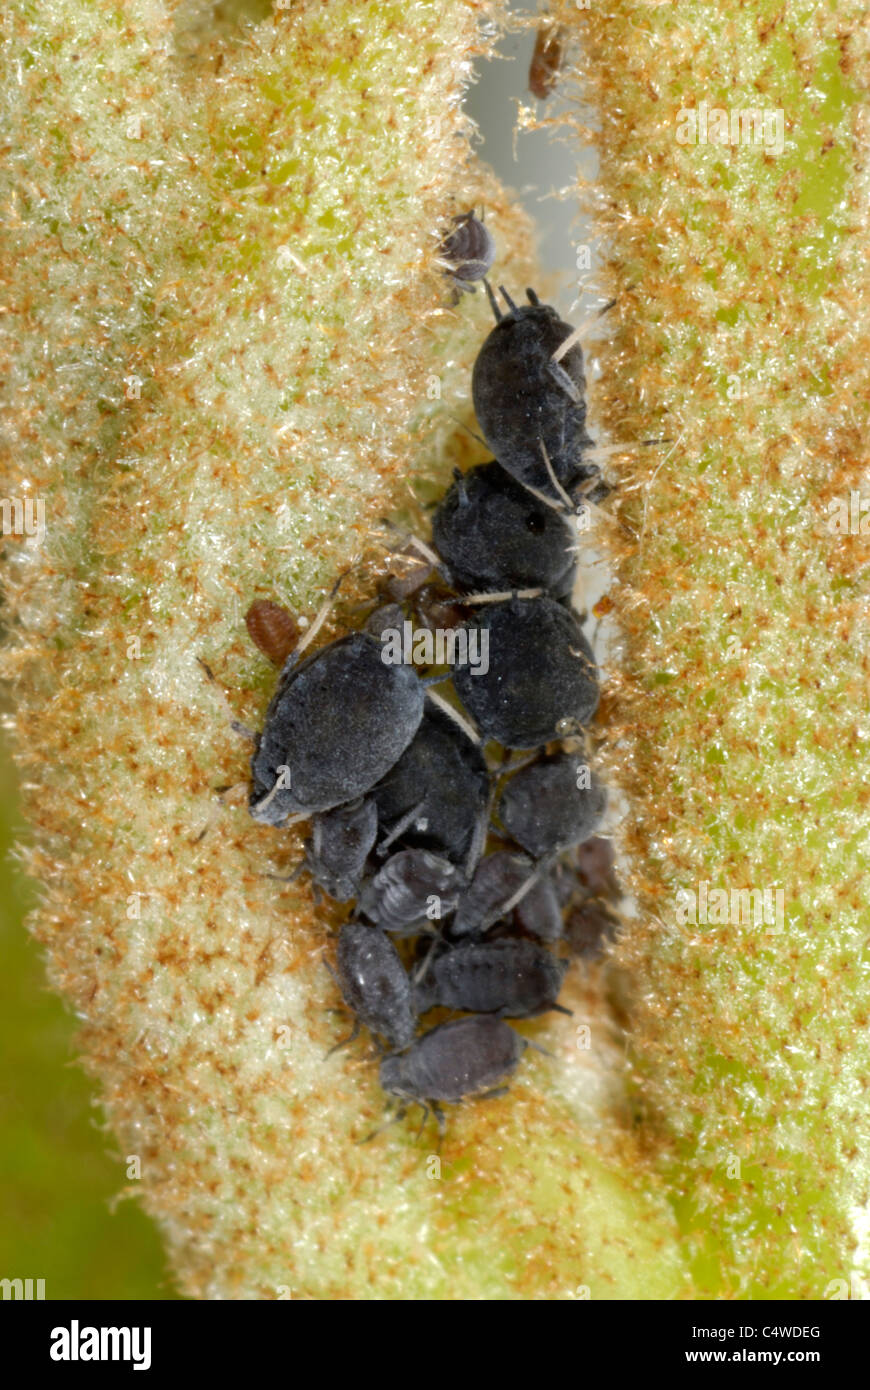 Ivy aphids (Aphis hederae) on tree ivy (Fatshedera lizei) Stock Photo